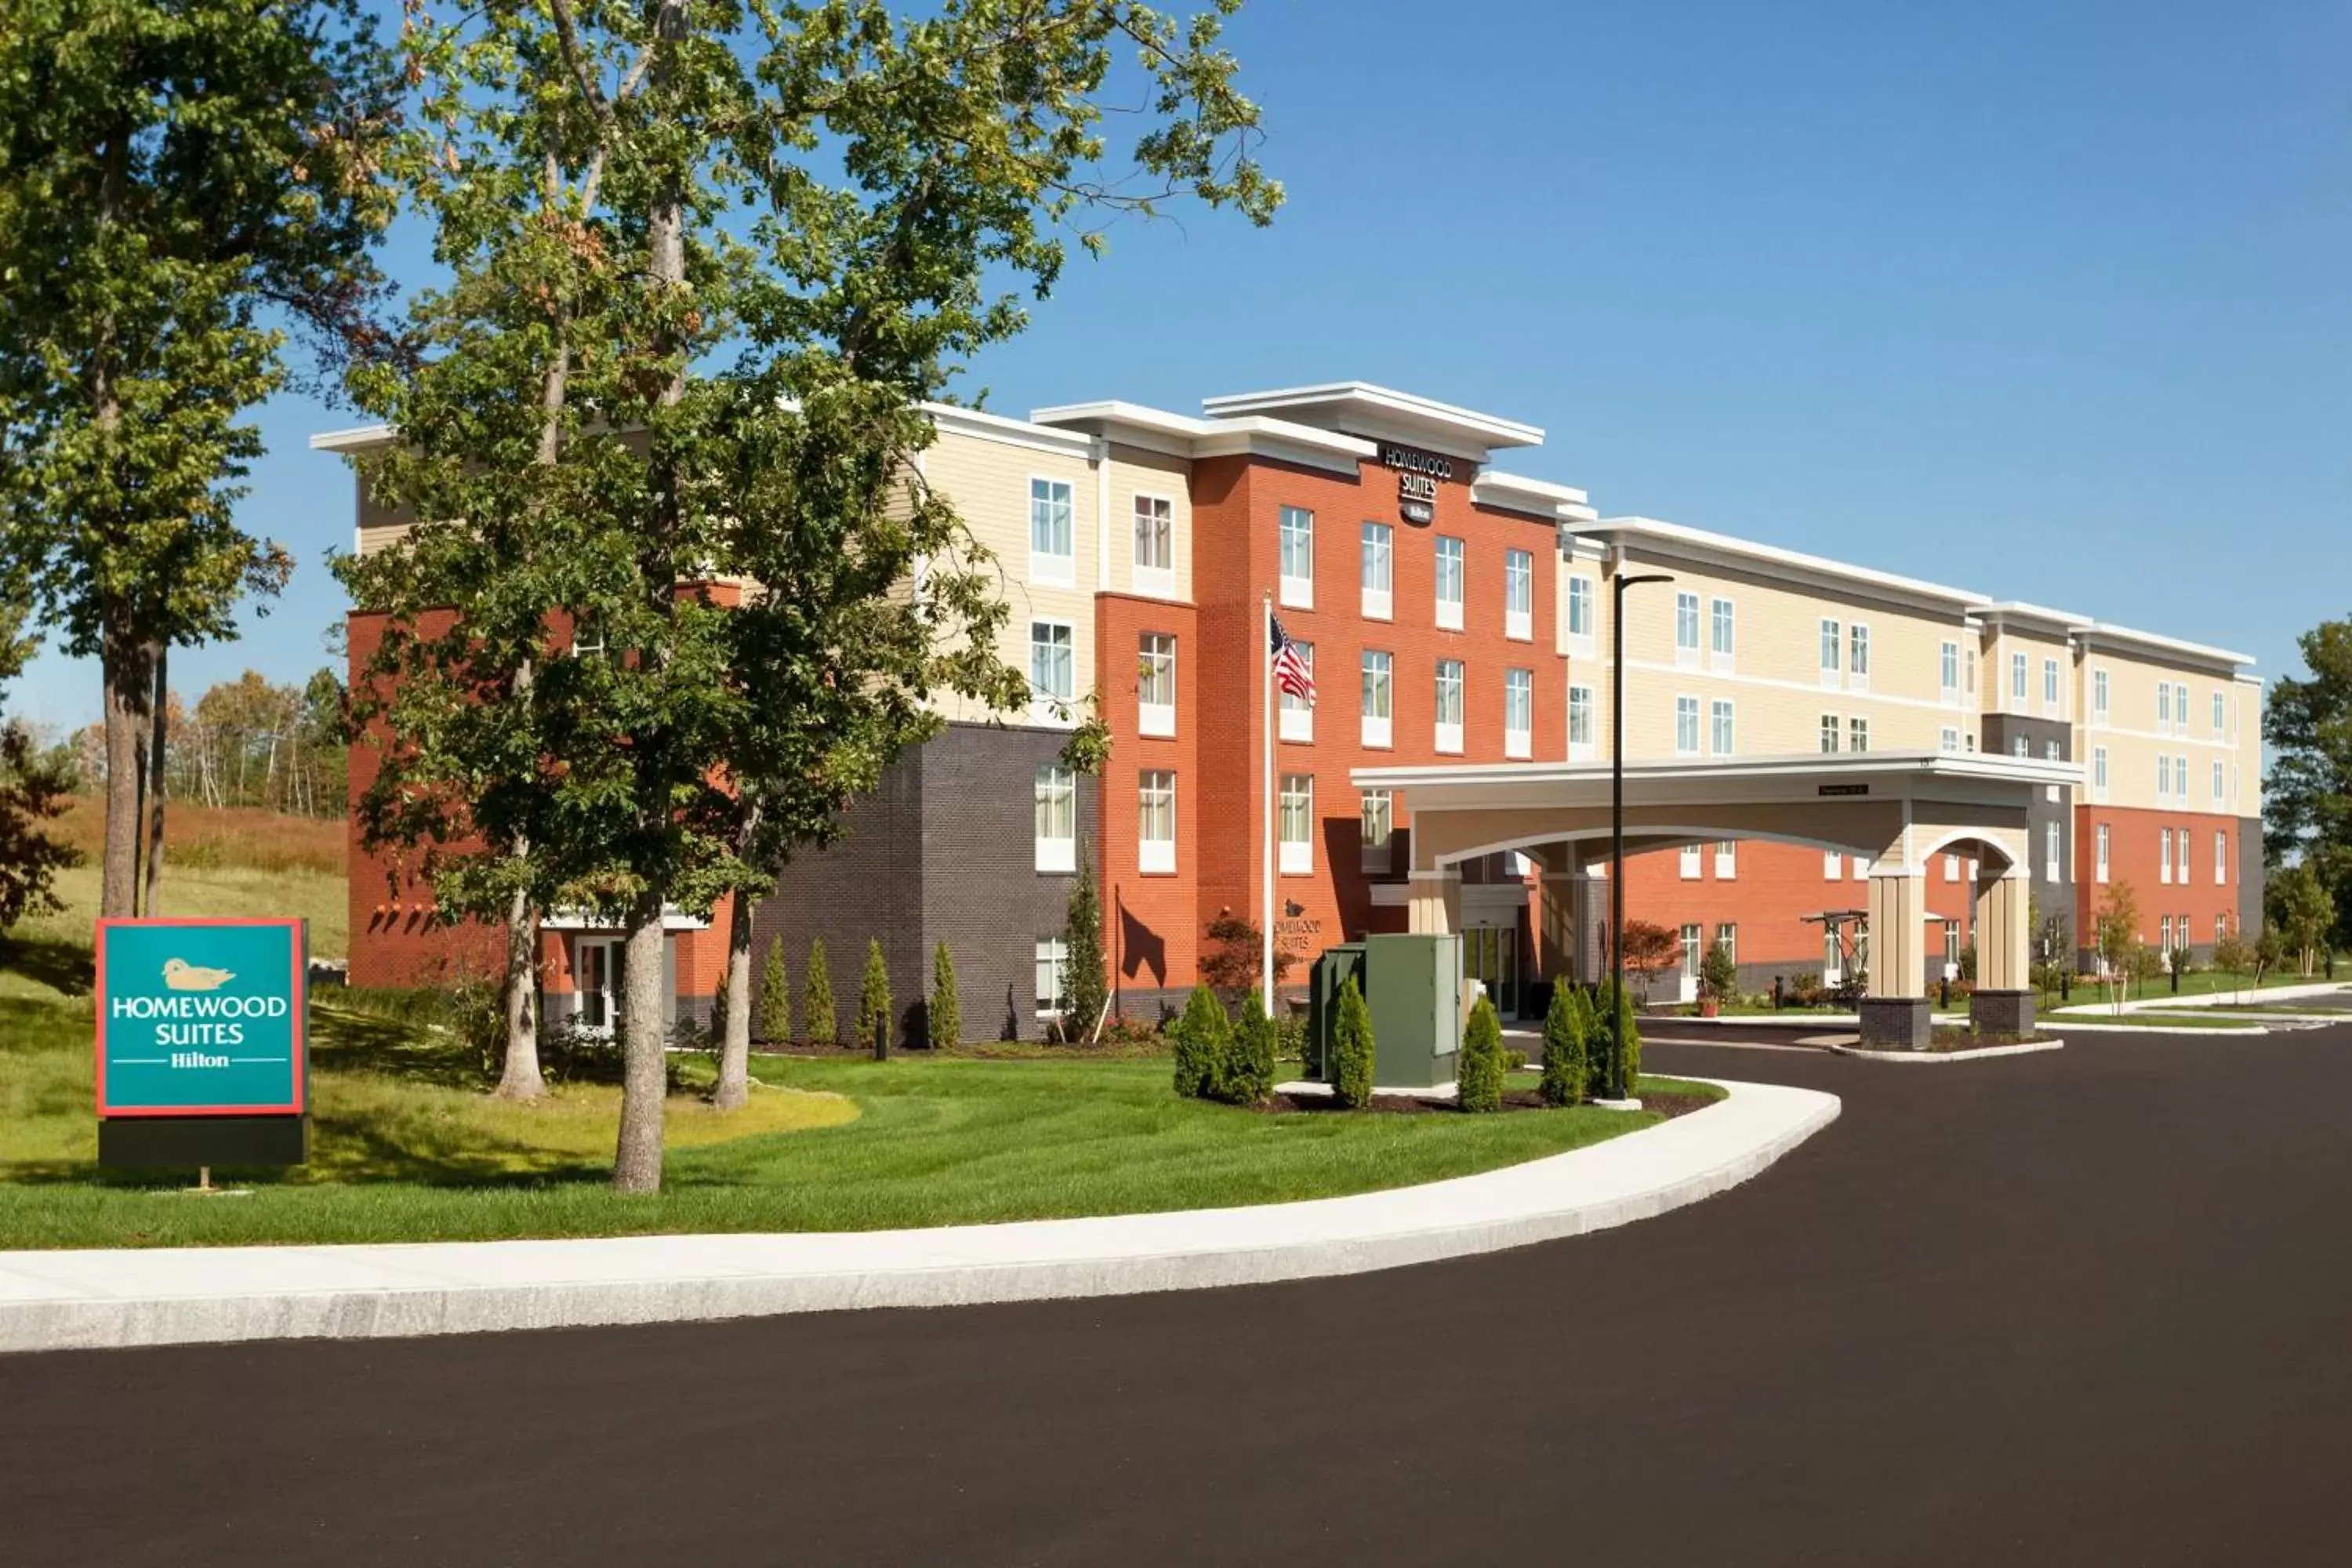 Property Building in Homewood Suites by Hilton Gateway Hills Nashua